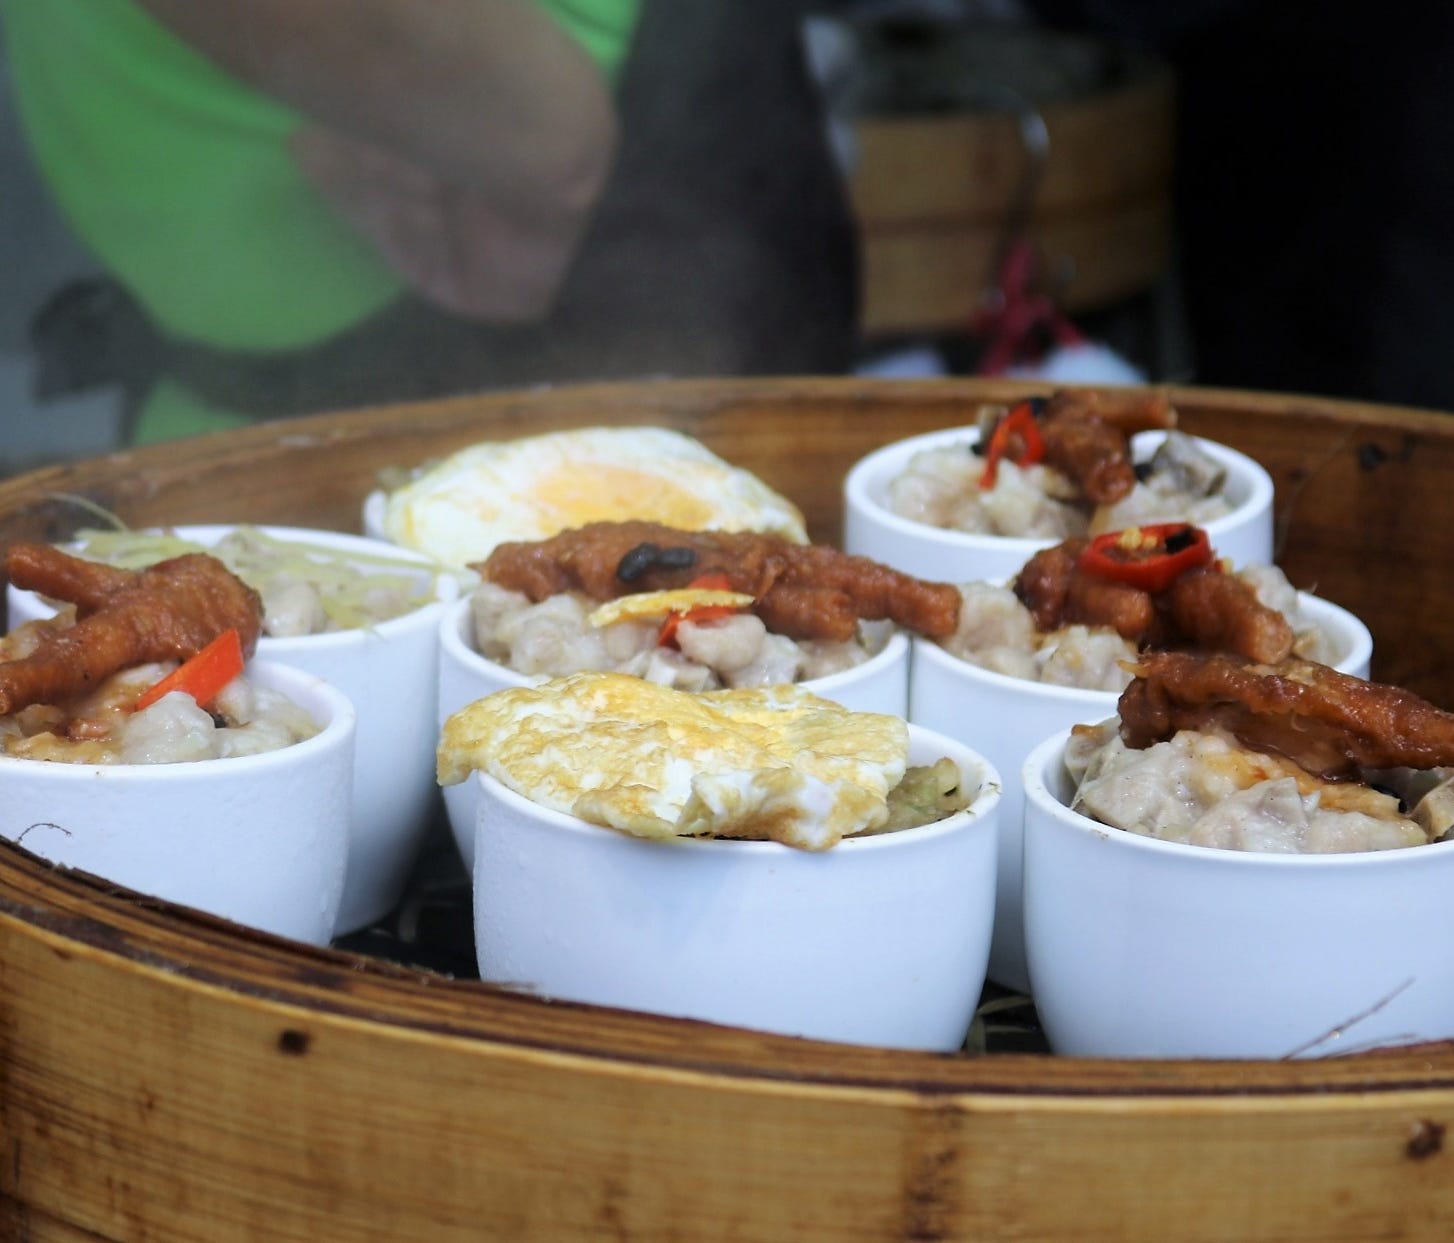 Small bowls from street stalls may be loaded with a variety of treats, such as dumplings, chicken feet, eggs or fried rice.